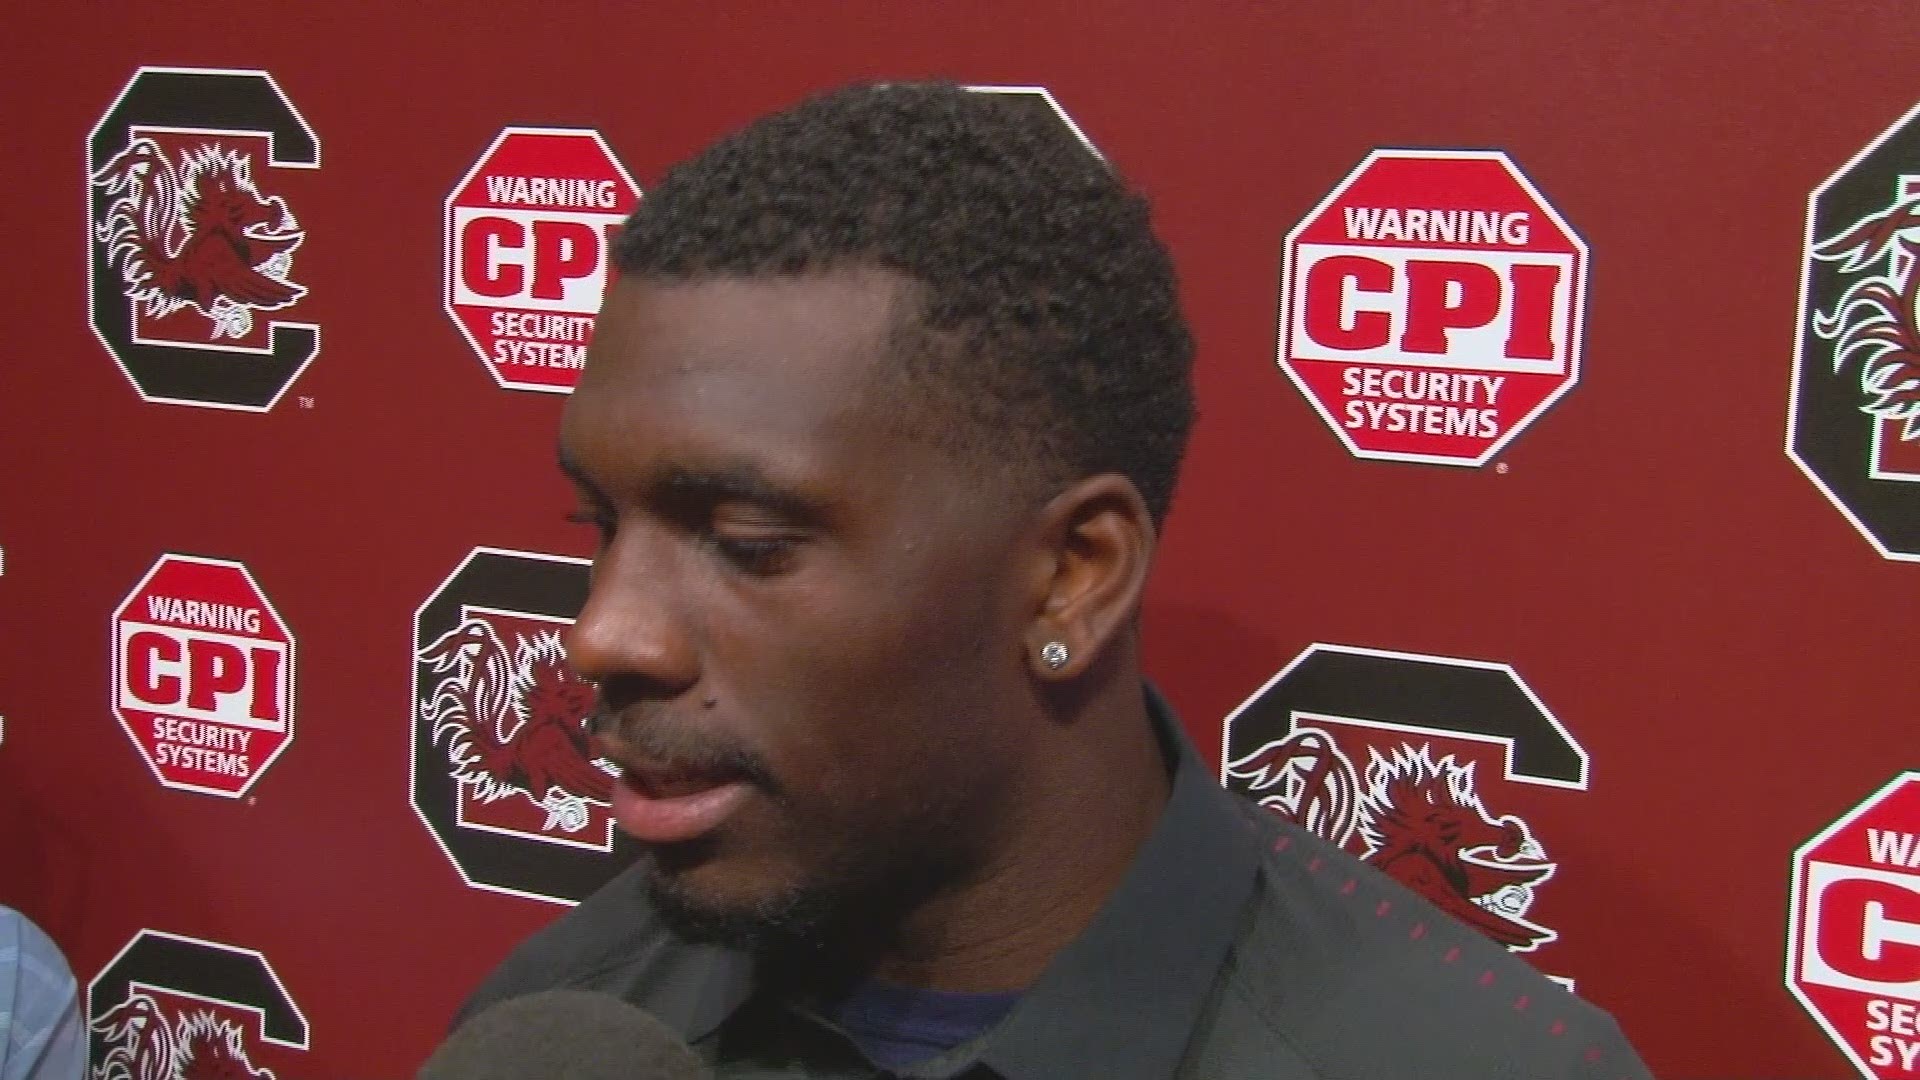 Clemson grad transfer Tavien Feaster details why he chose to play at South Carolina, what his big takeaways are since joining the Gamecocks and the expectations he has for himself in his final year of college football.